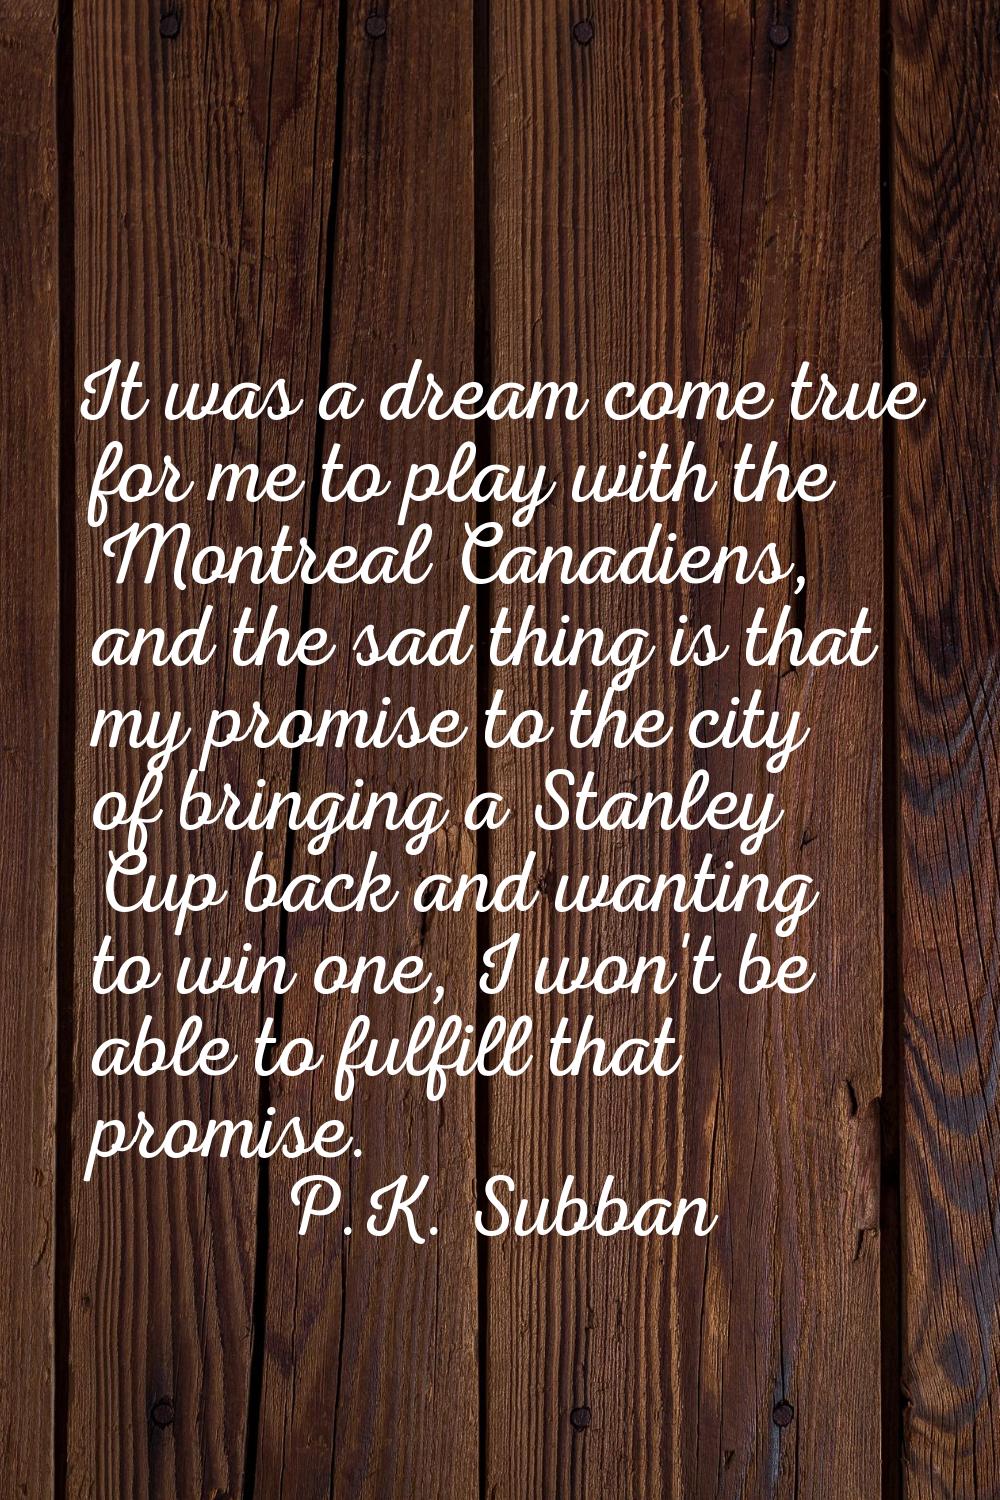 It was a dream come true for me to play with the Montreal Canadiens, and the sad thing is that my p